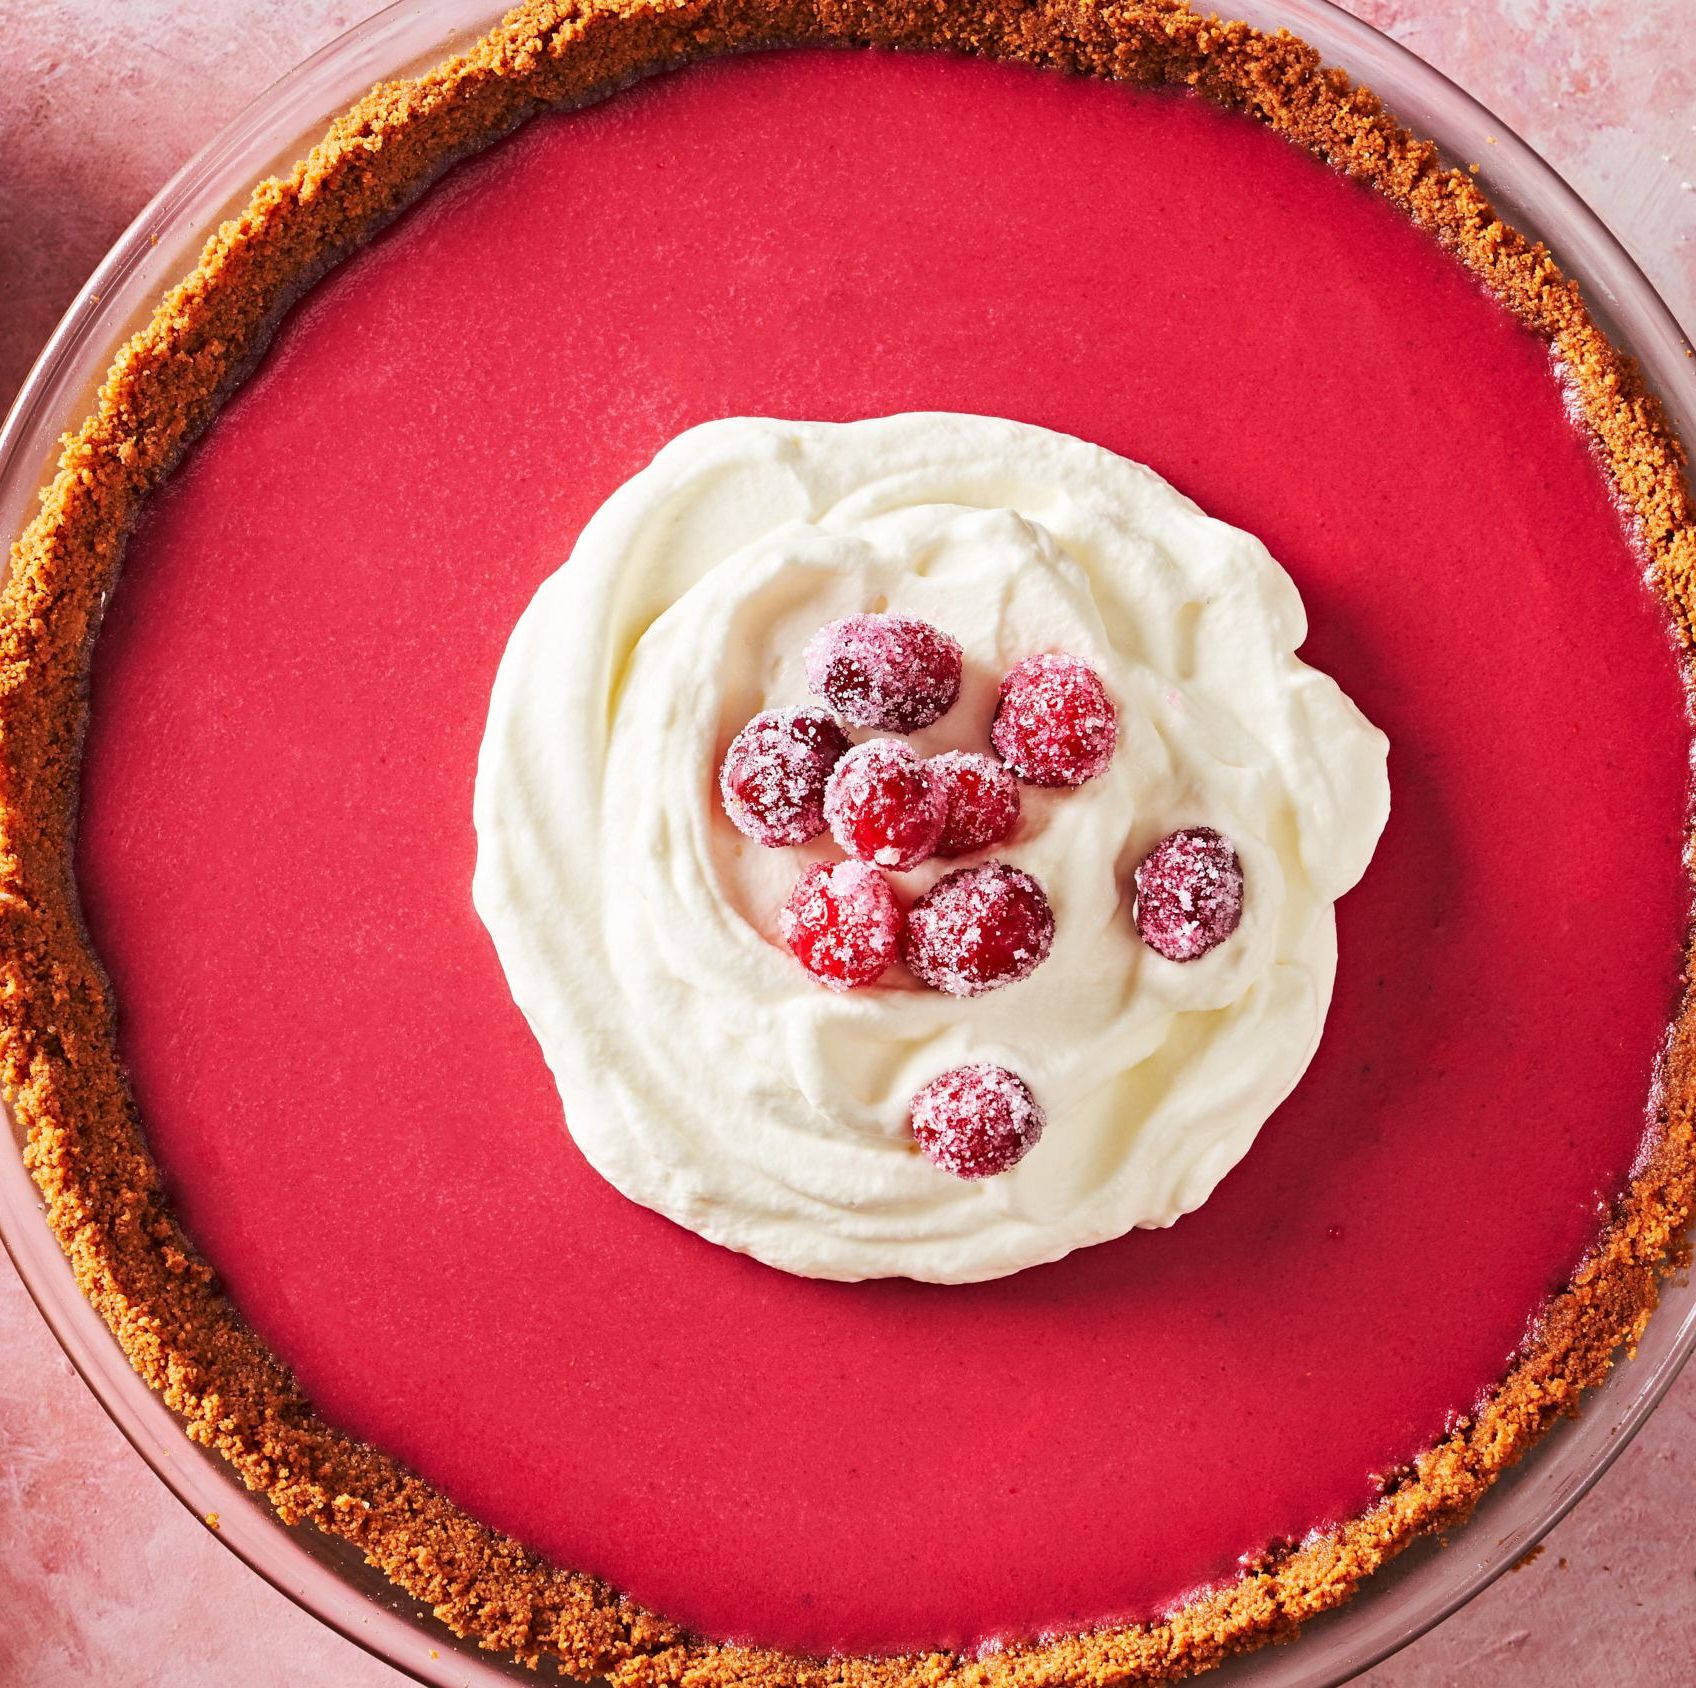 PSA: The Crust On This Cranberry Pie Tastes Like Cookie Butter